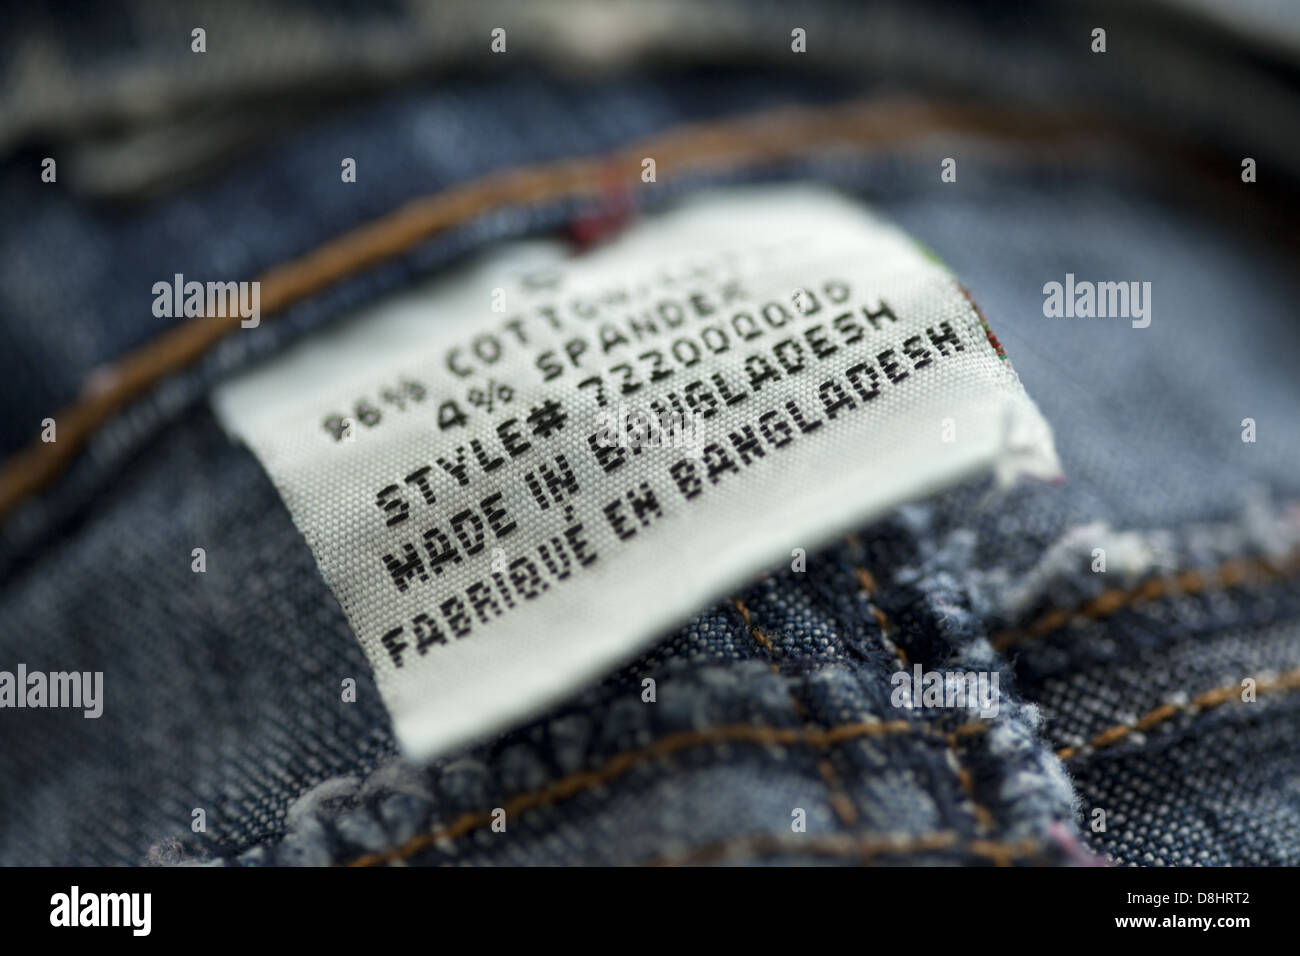 Made in  Bangladesh, jeans tag Stock Photo